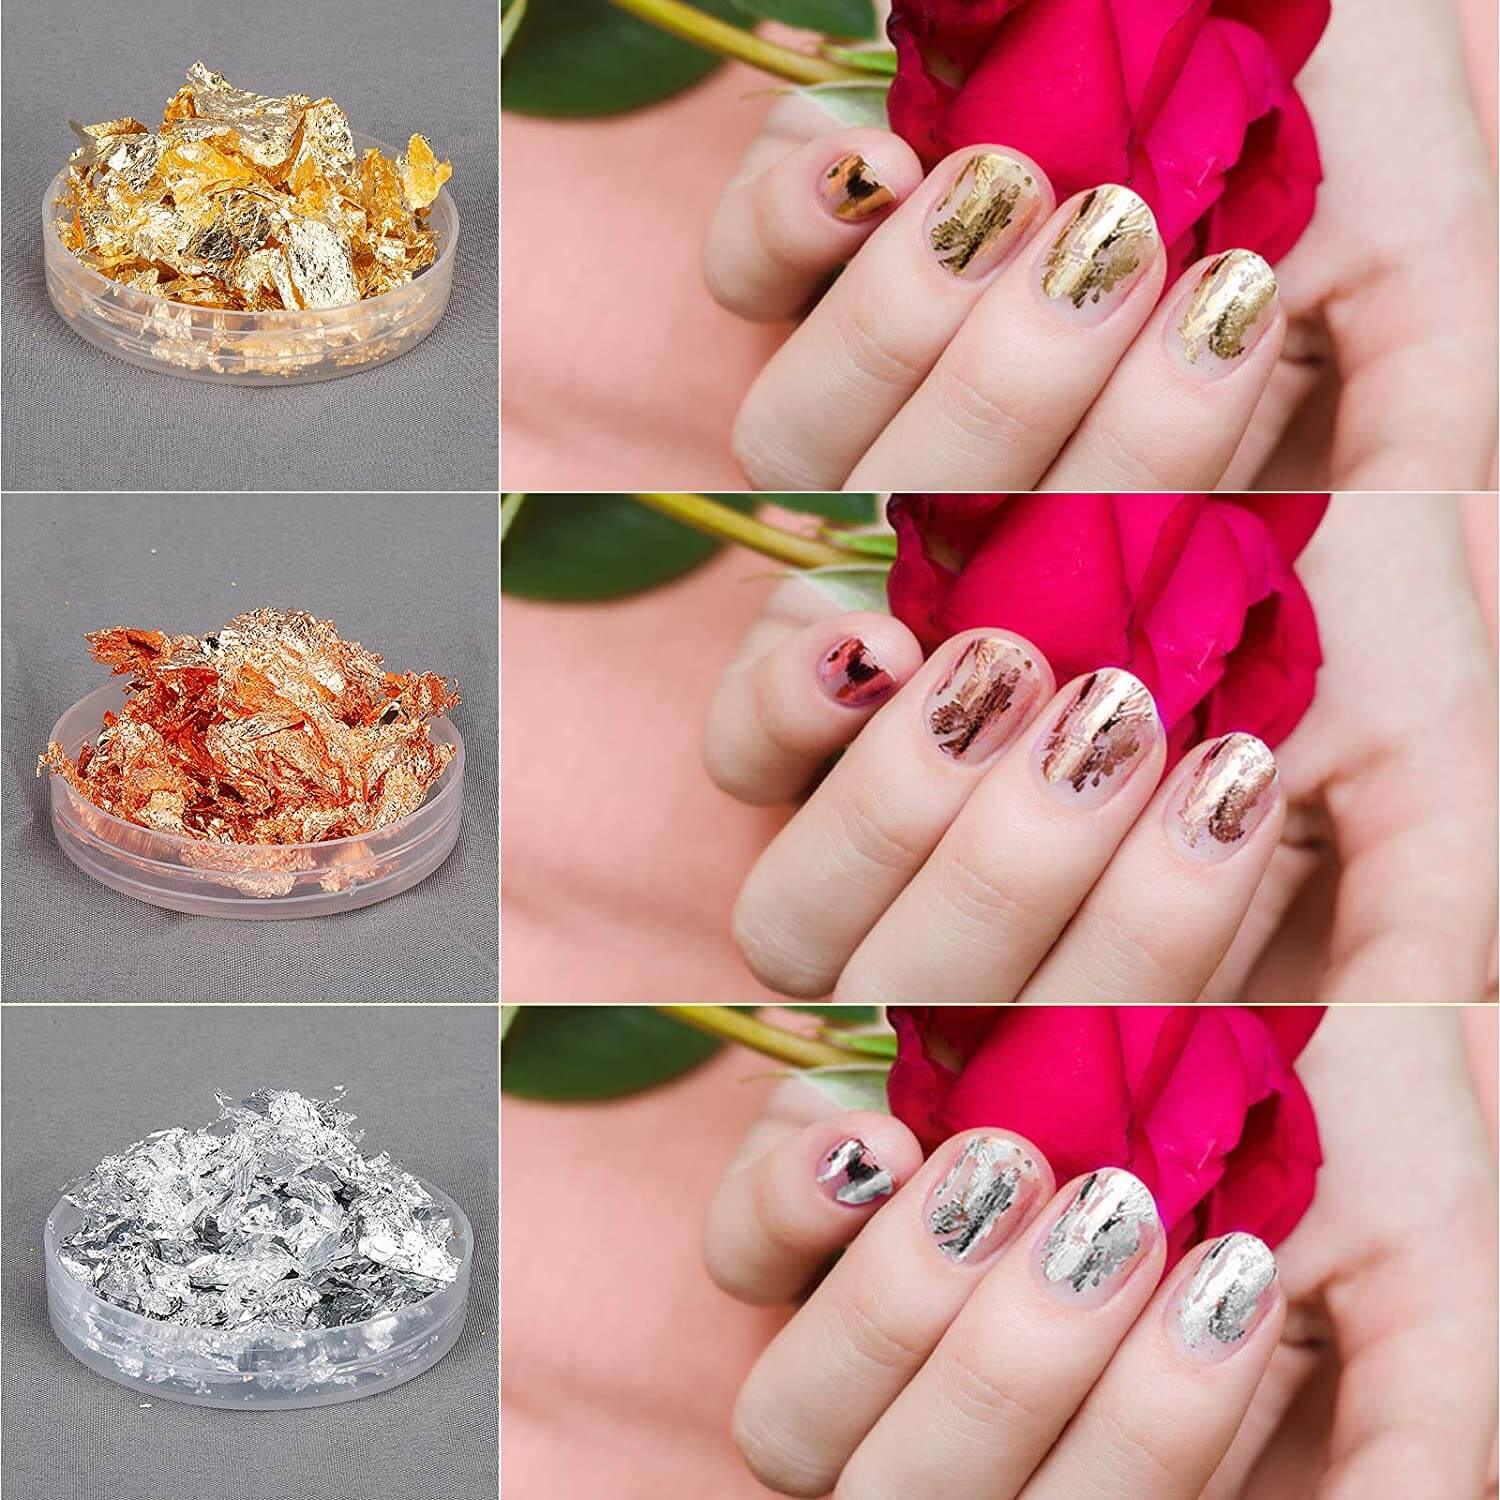  Didiseaon 6 Resin Crafts Nail Decorations for Nail Art Resin  Gold Flakes Gold Flakes for Nails Nail Flakes foil for Nails Art Design  Nail Gold foil Resin Flakes Bottled Resin Sheet